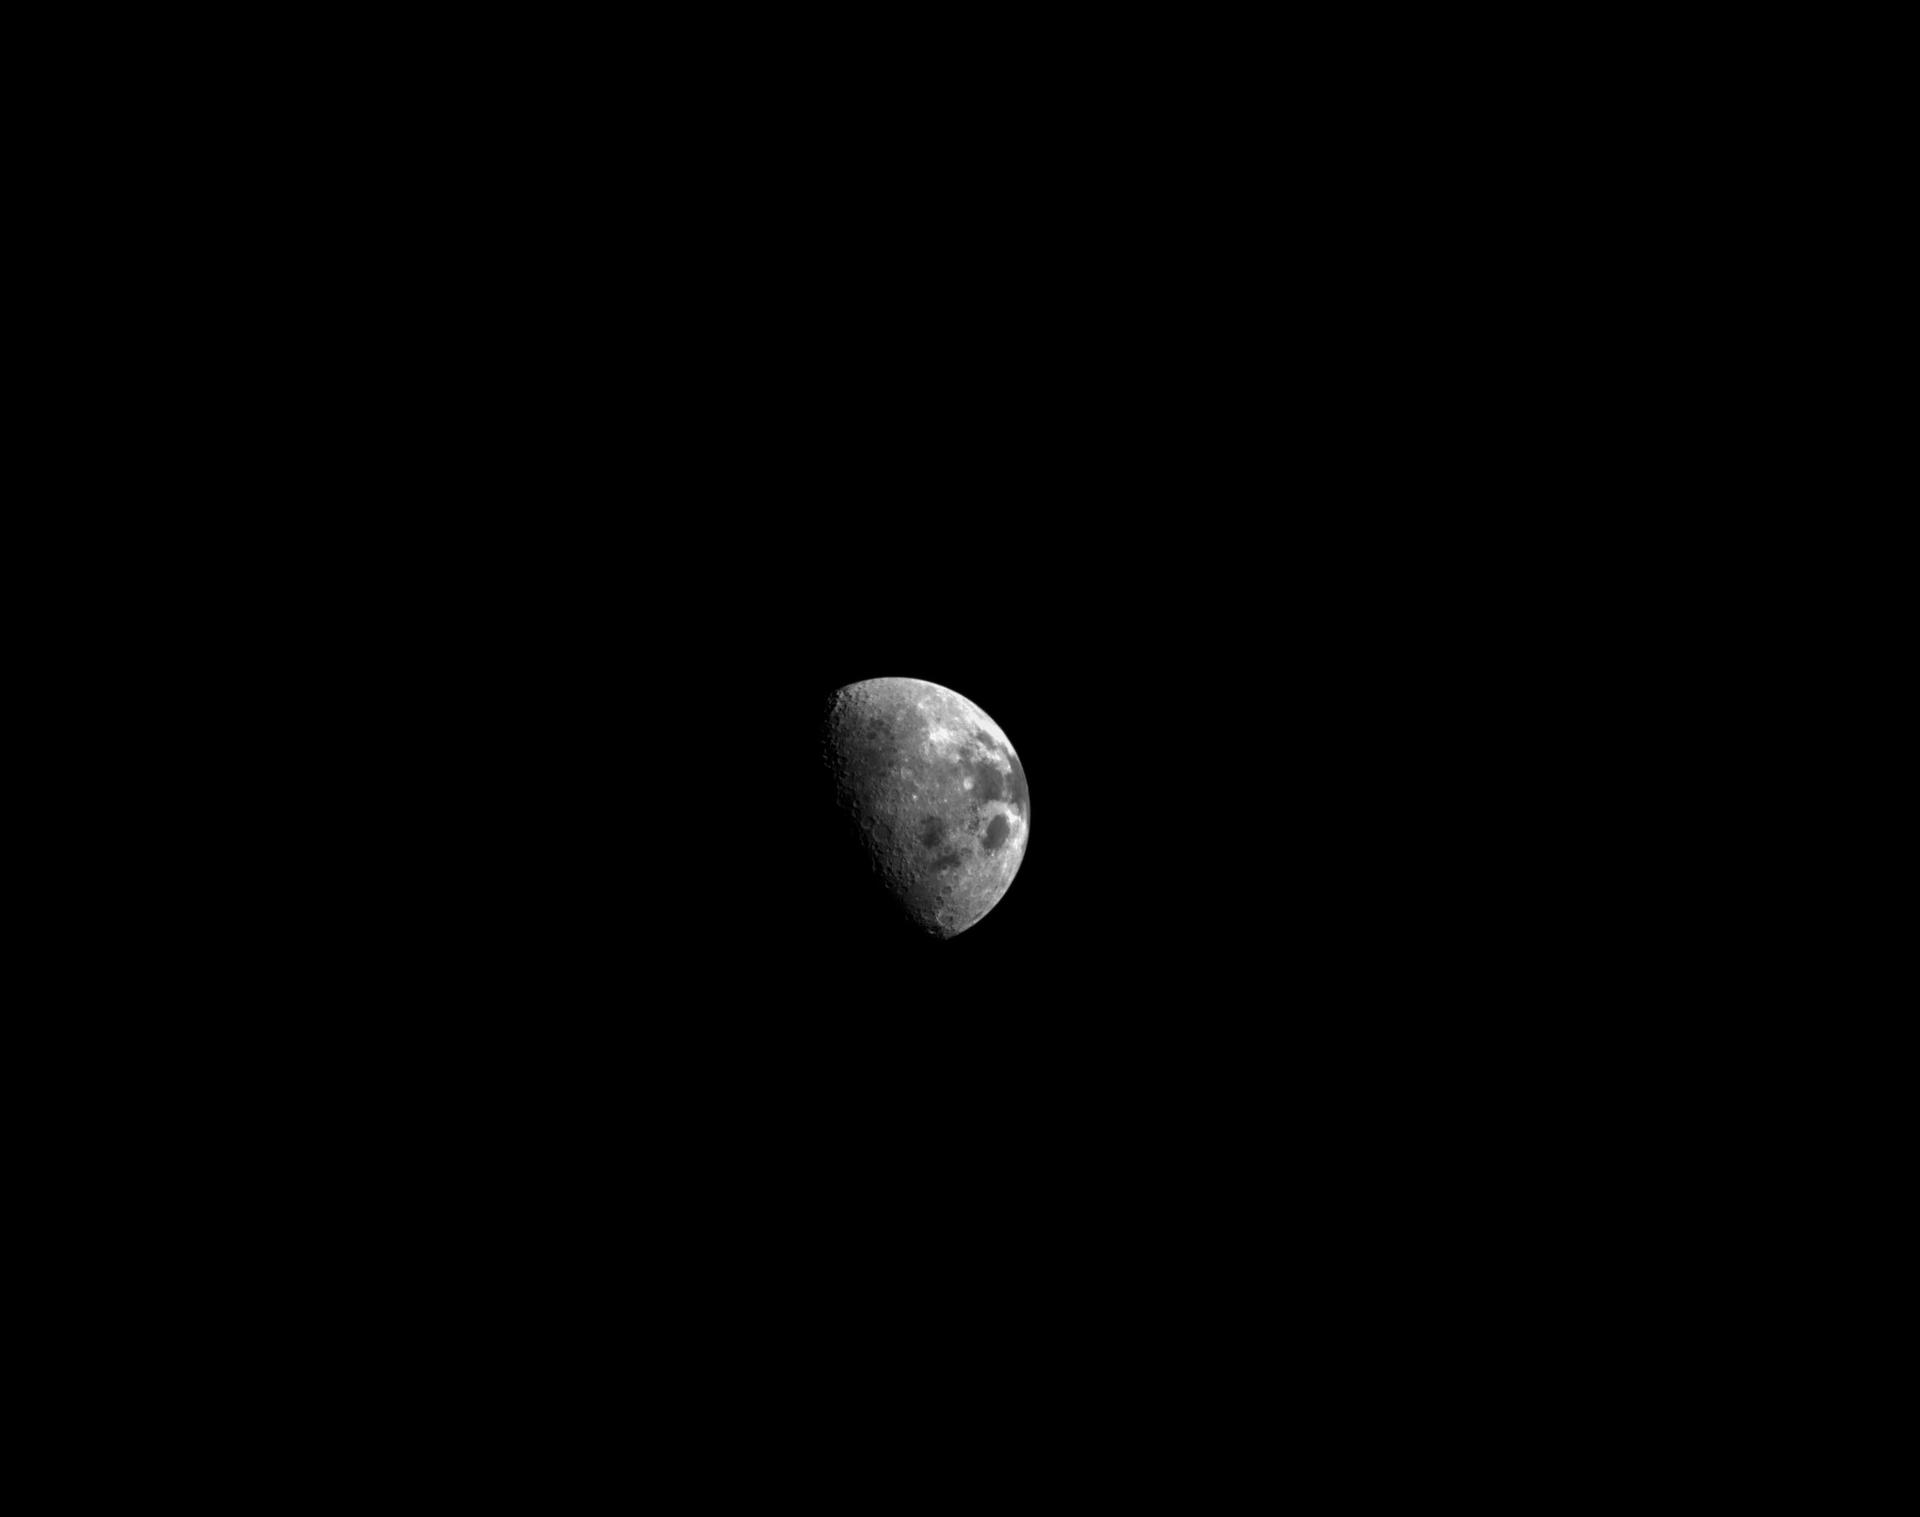 On flight day 21 of NASA's Artemis I mission, Orion's optical navigation camera looked back at the moon.